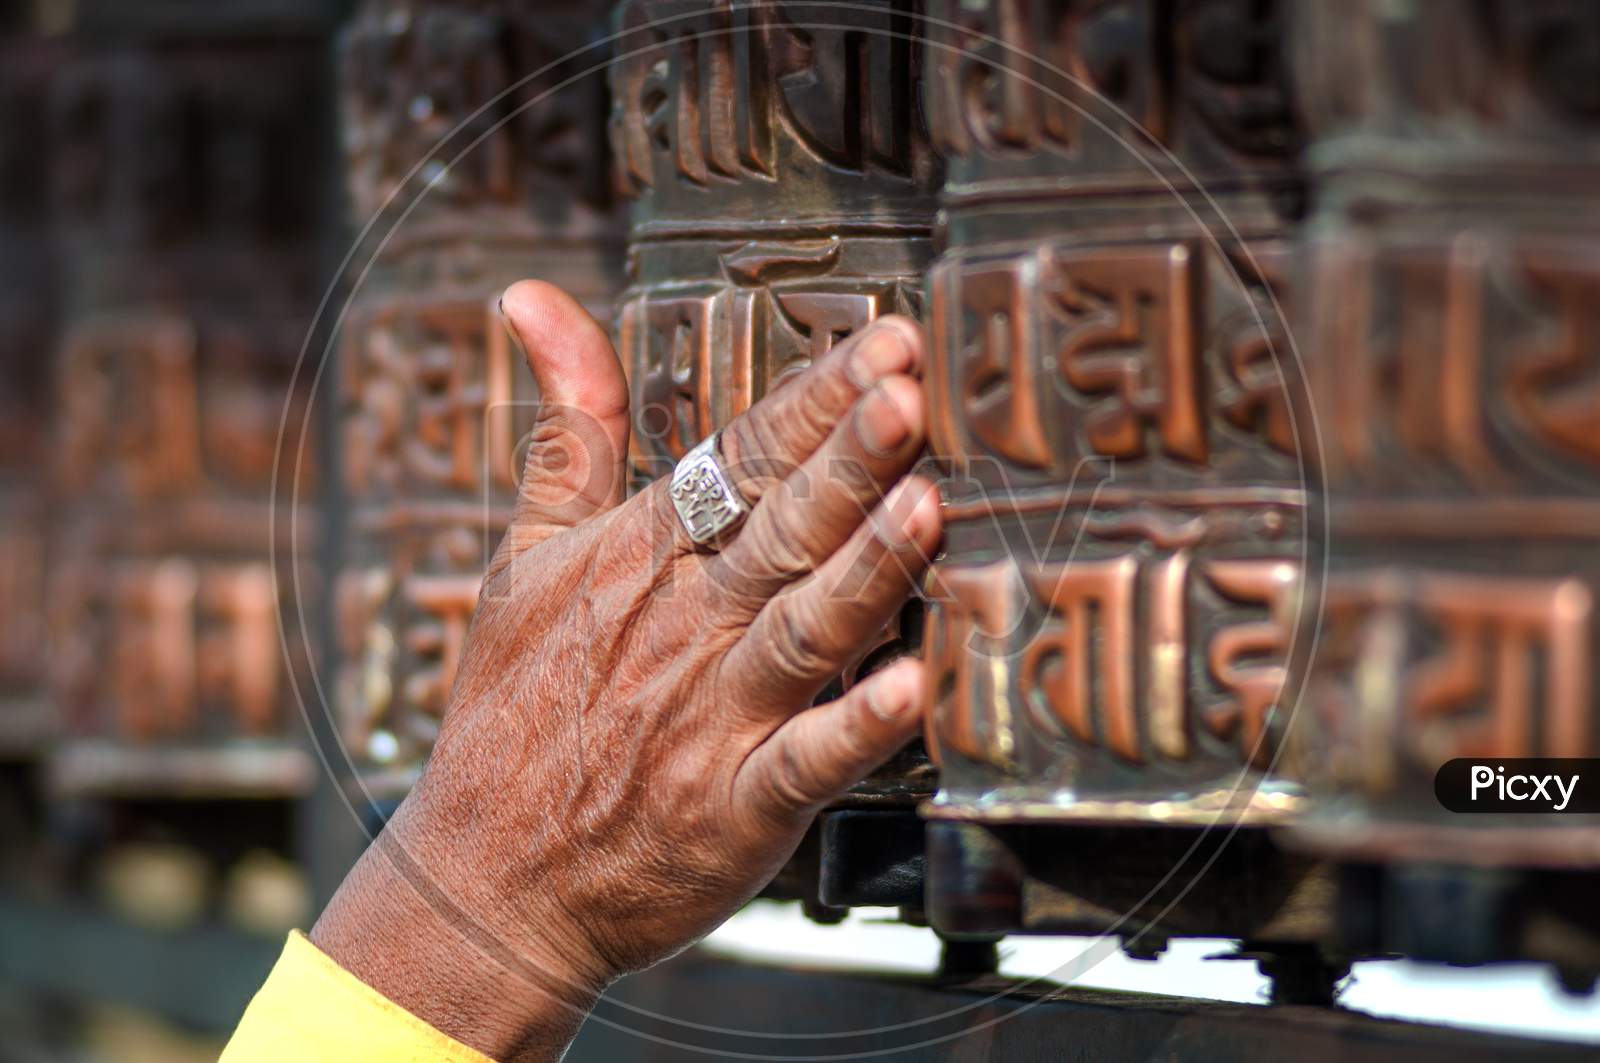 Prayer'S Wheel With Mantra "Om Mani Padme Hum", An Ancient Buddhist Mantra. In English, This Rhythmic Chant Literally Translates To “Praise To The Jewel In The Lotus.”